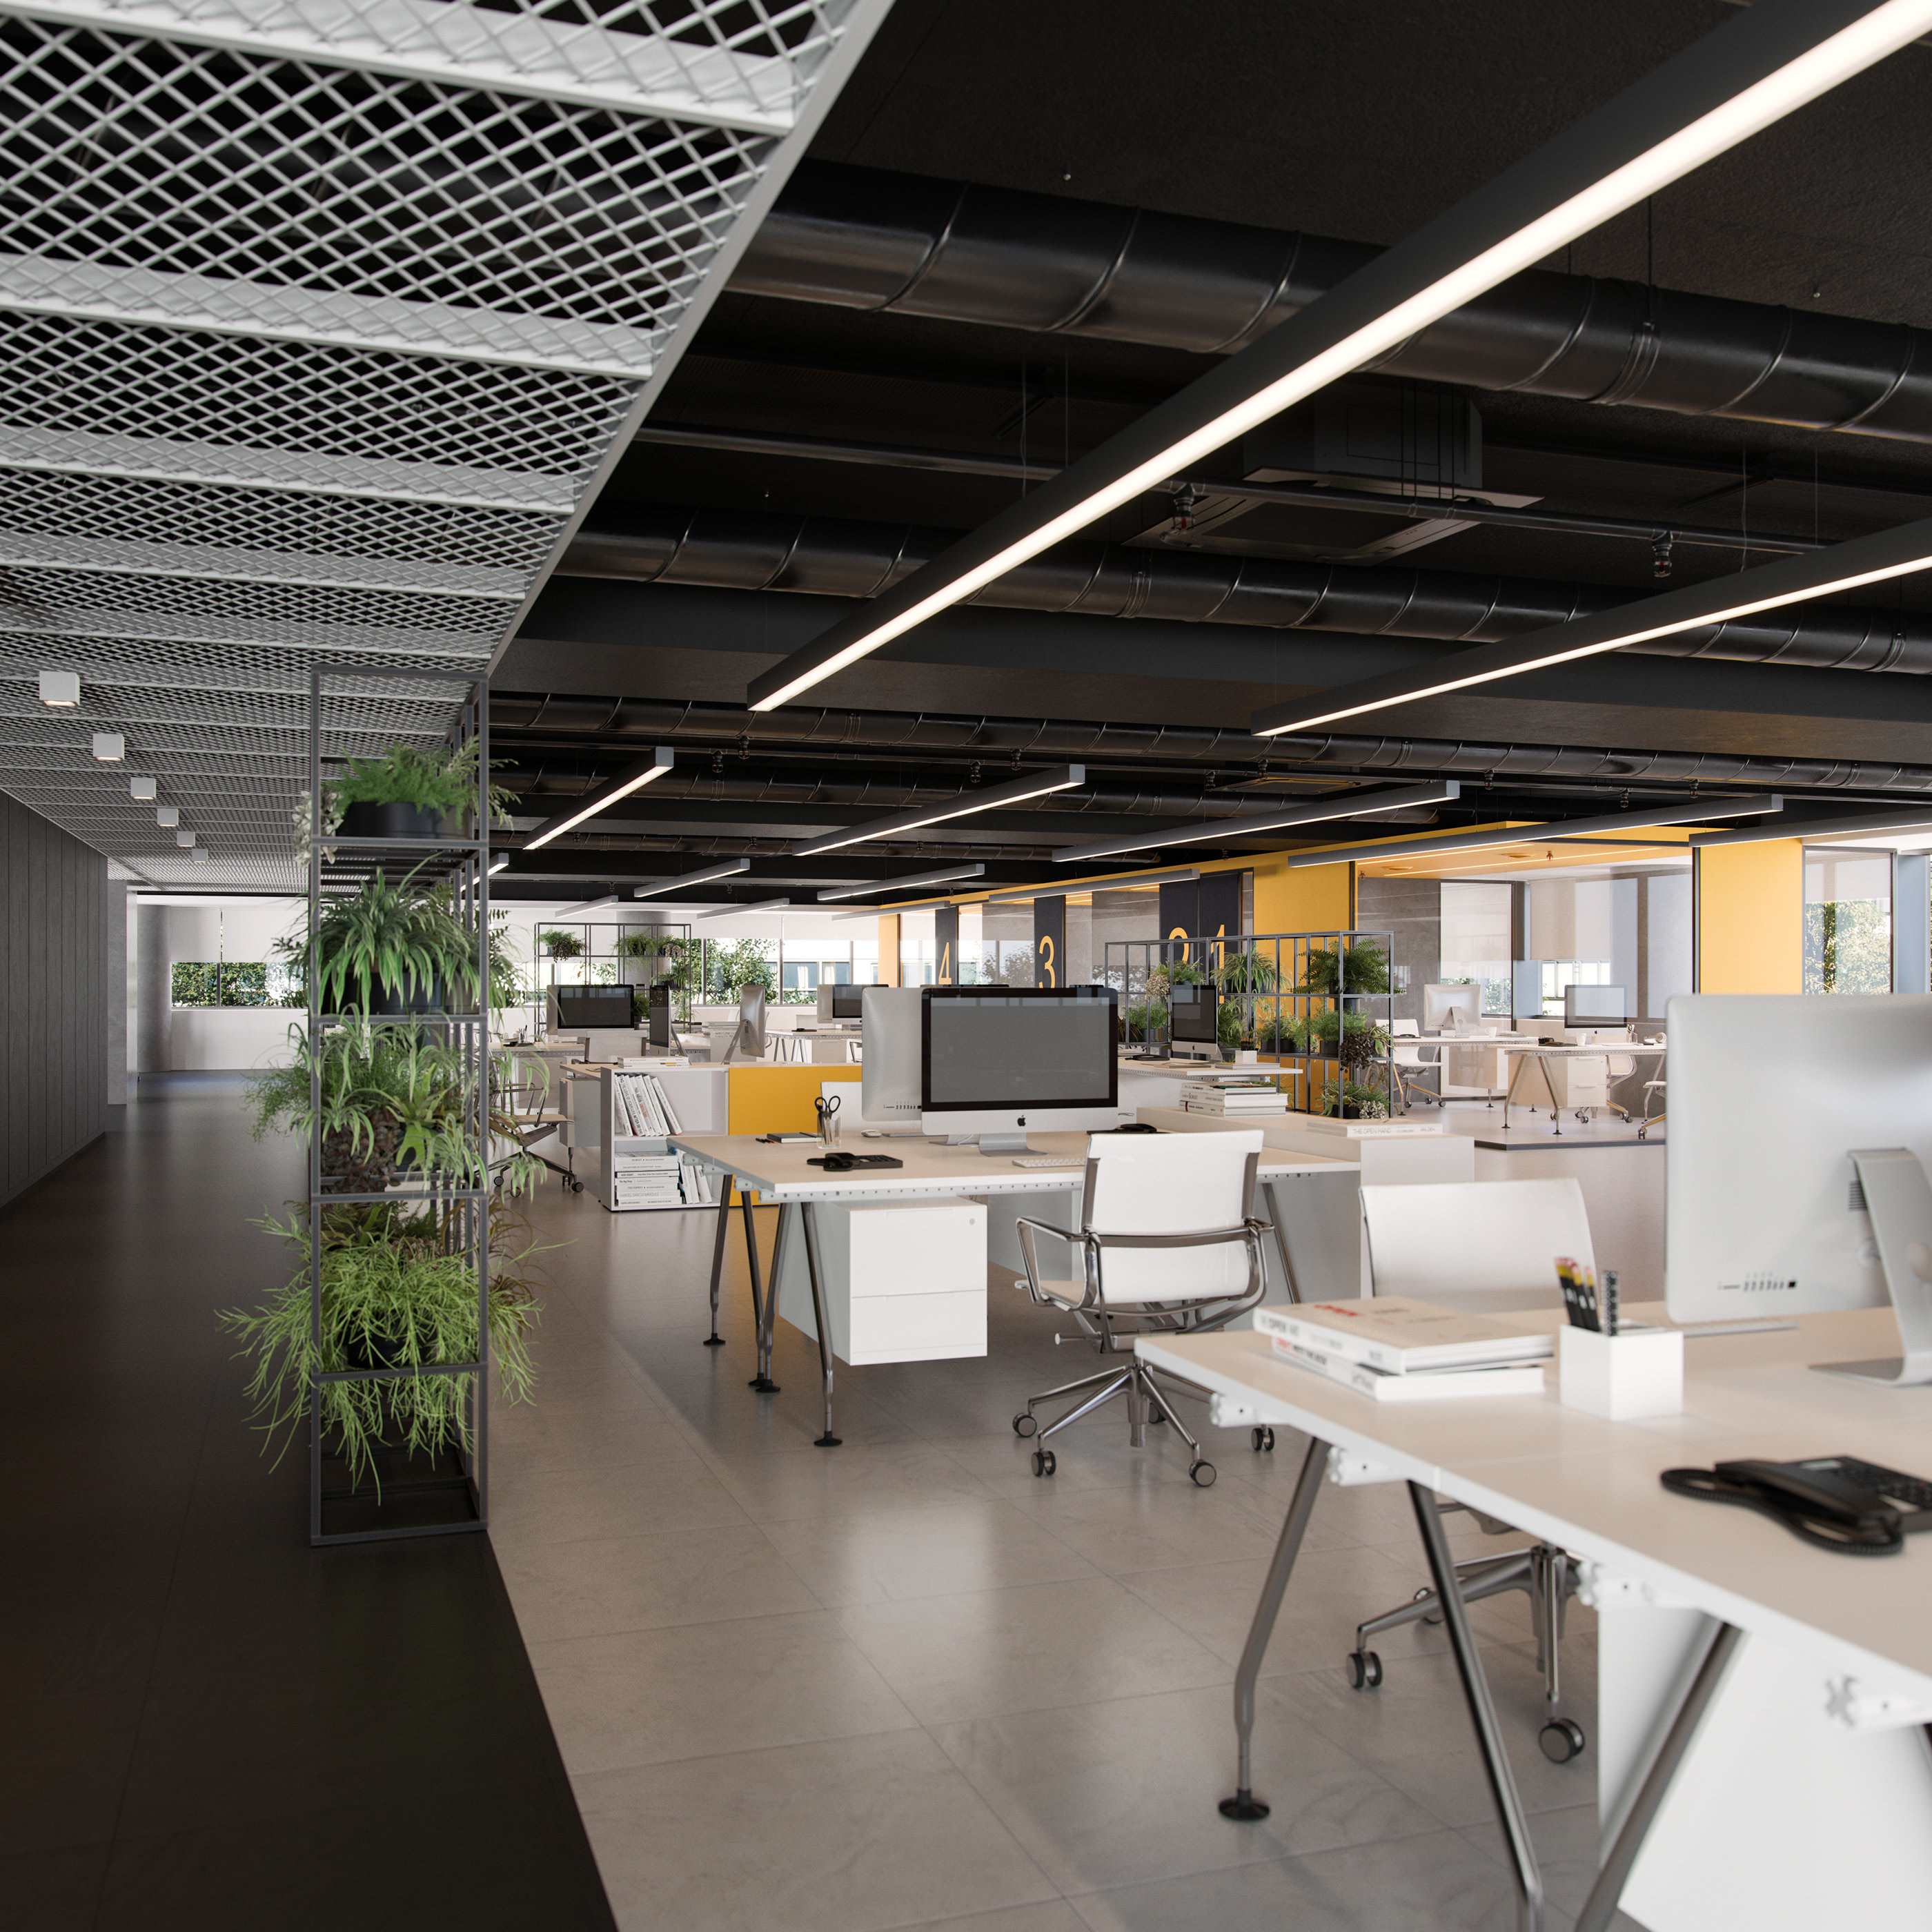 Office design: Interior design & beauty in the workspace